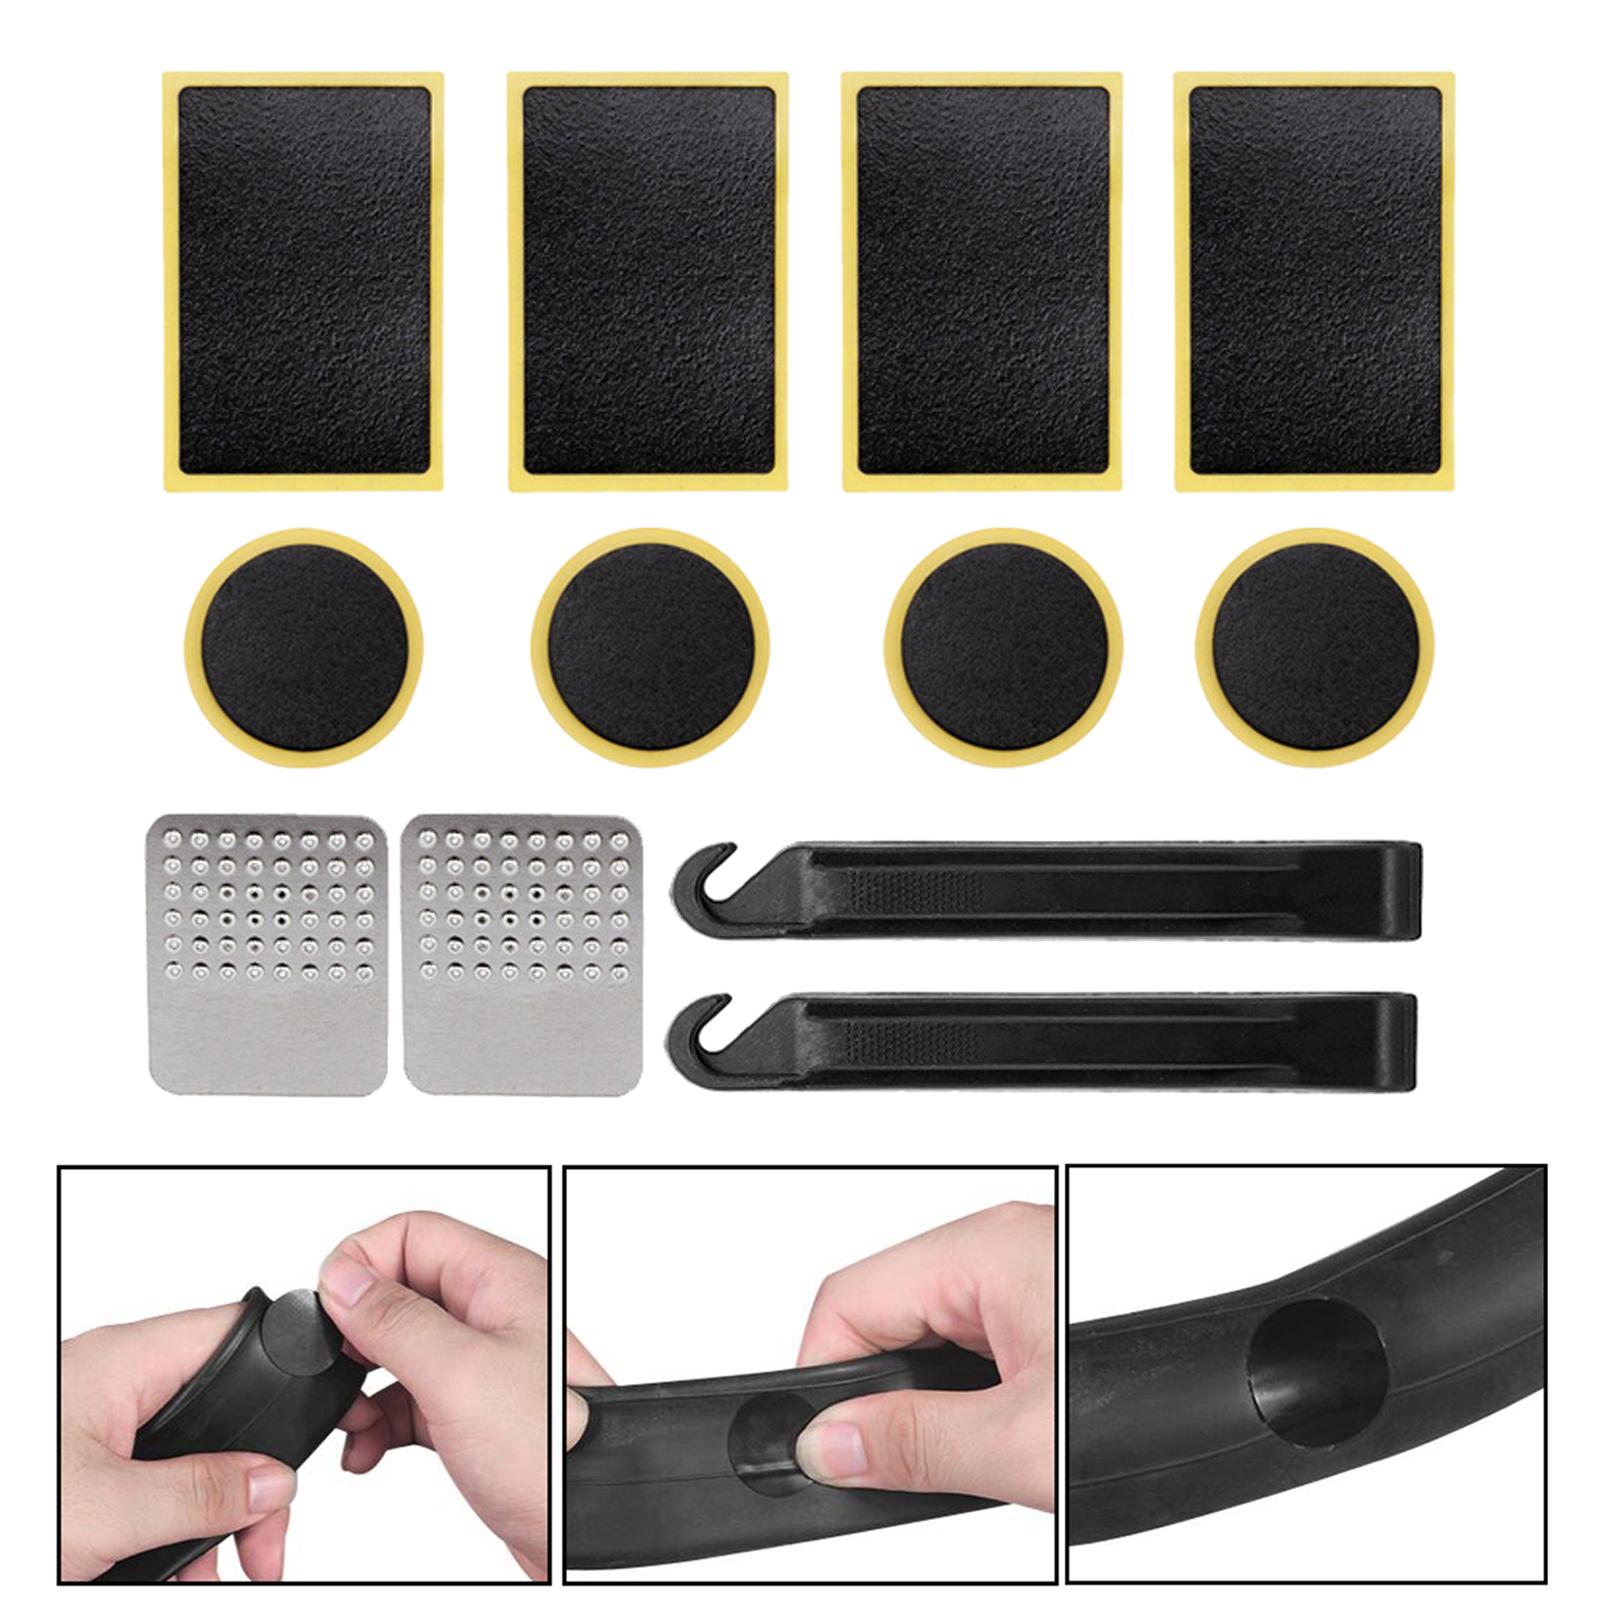 Bicycle Tire Repair Kit Rubber with Metal Rasp for Patches Folding Bike 12pcs kit